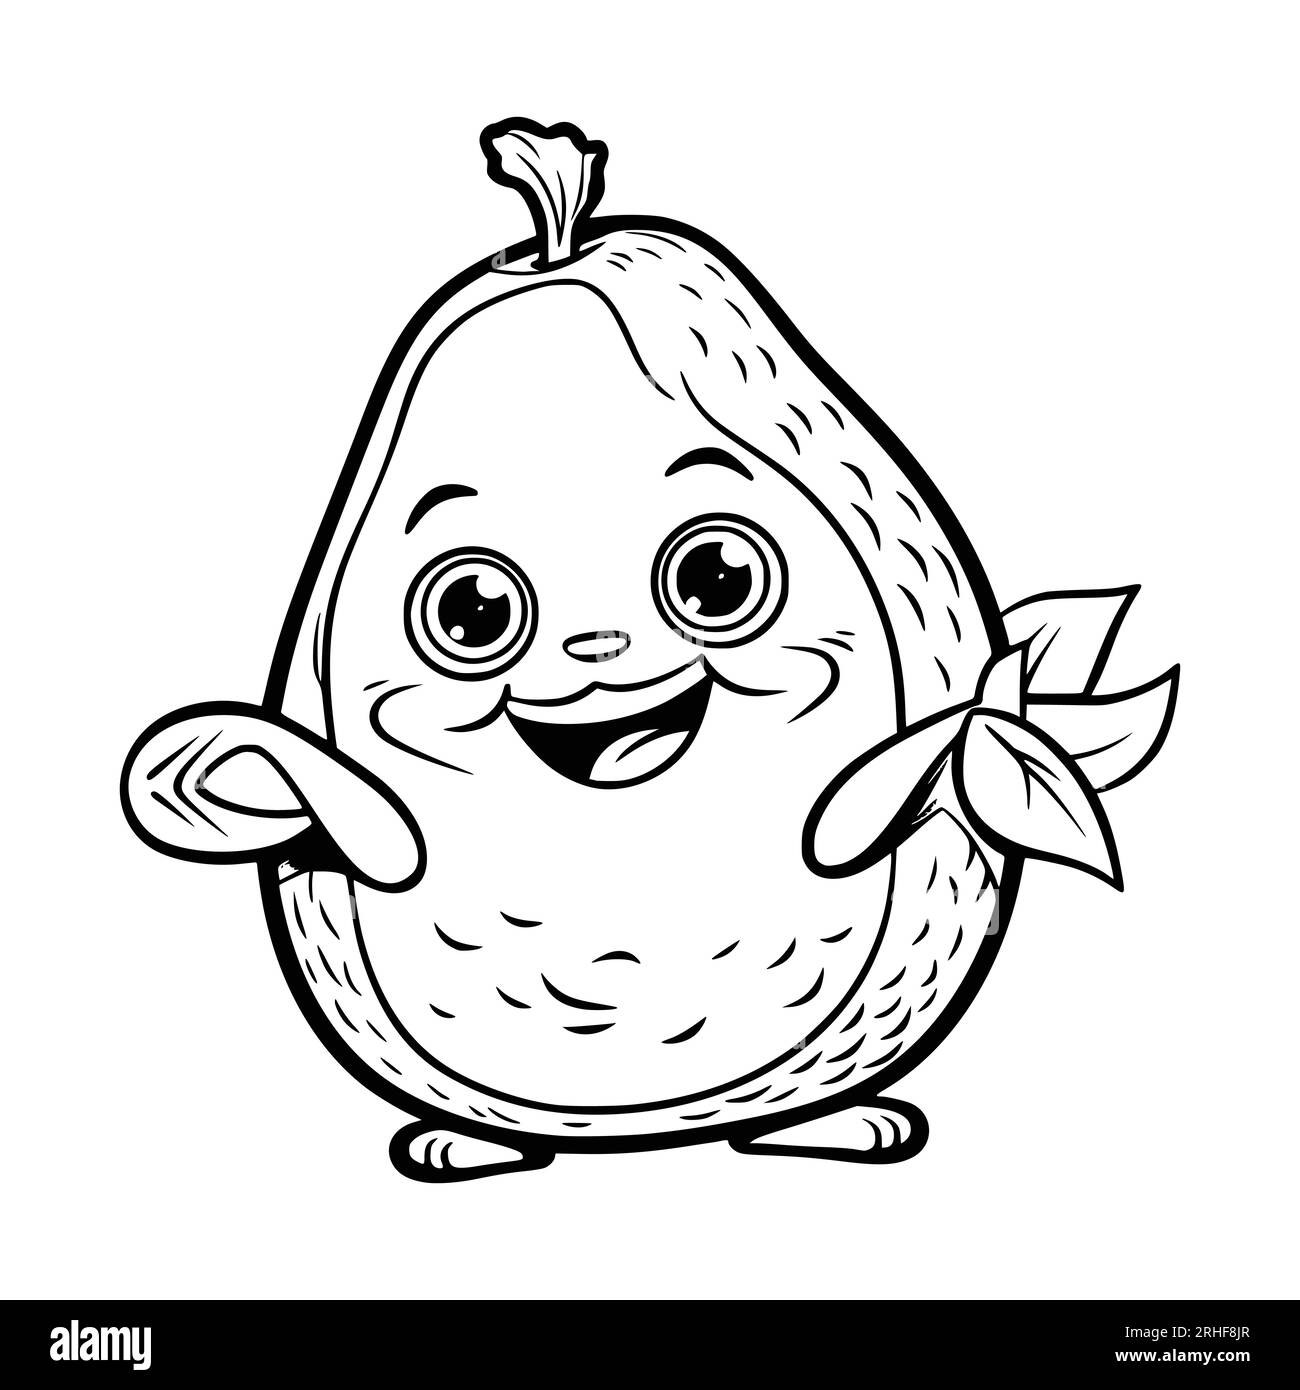 Avocado Coloring Page For Kids Stock Vector